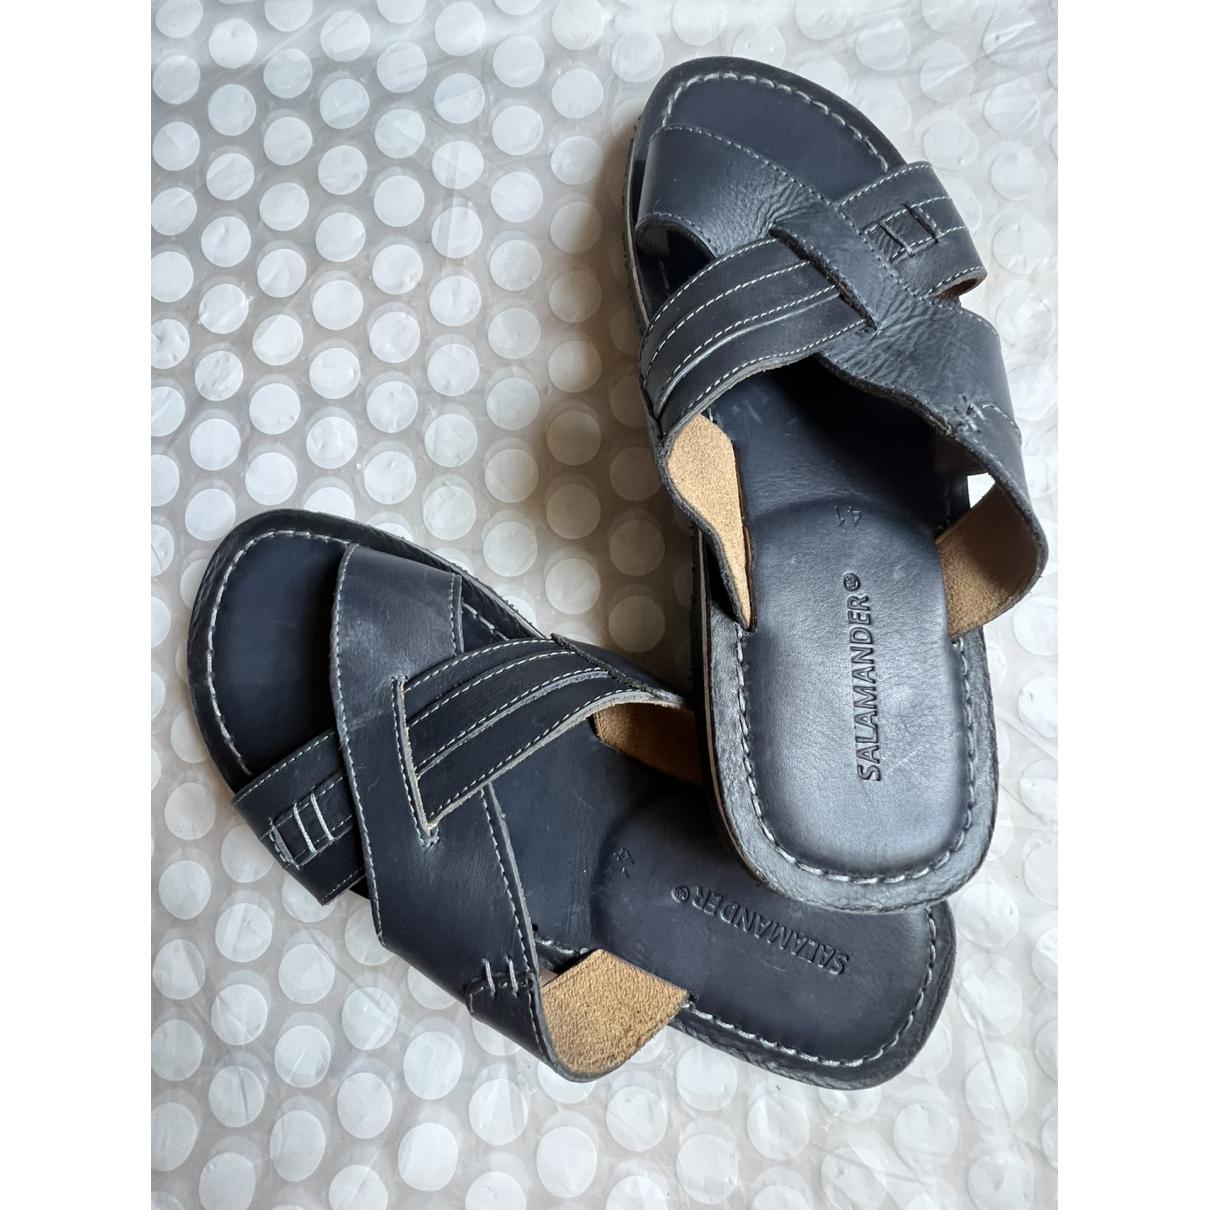 EU SALAMANDER sandals Leather size 22557086 Leather - in Navy 41